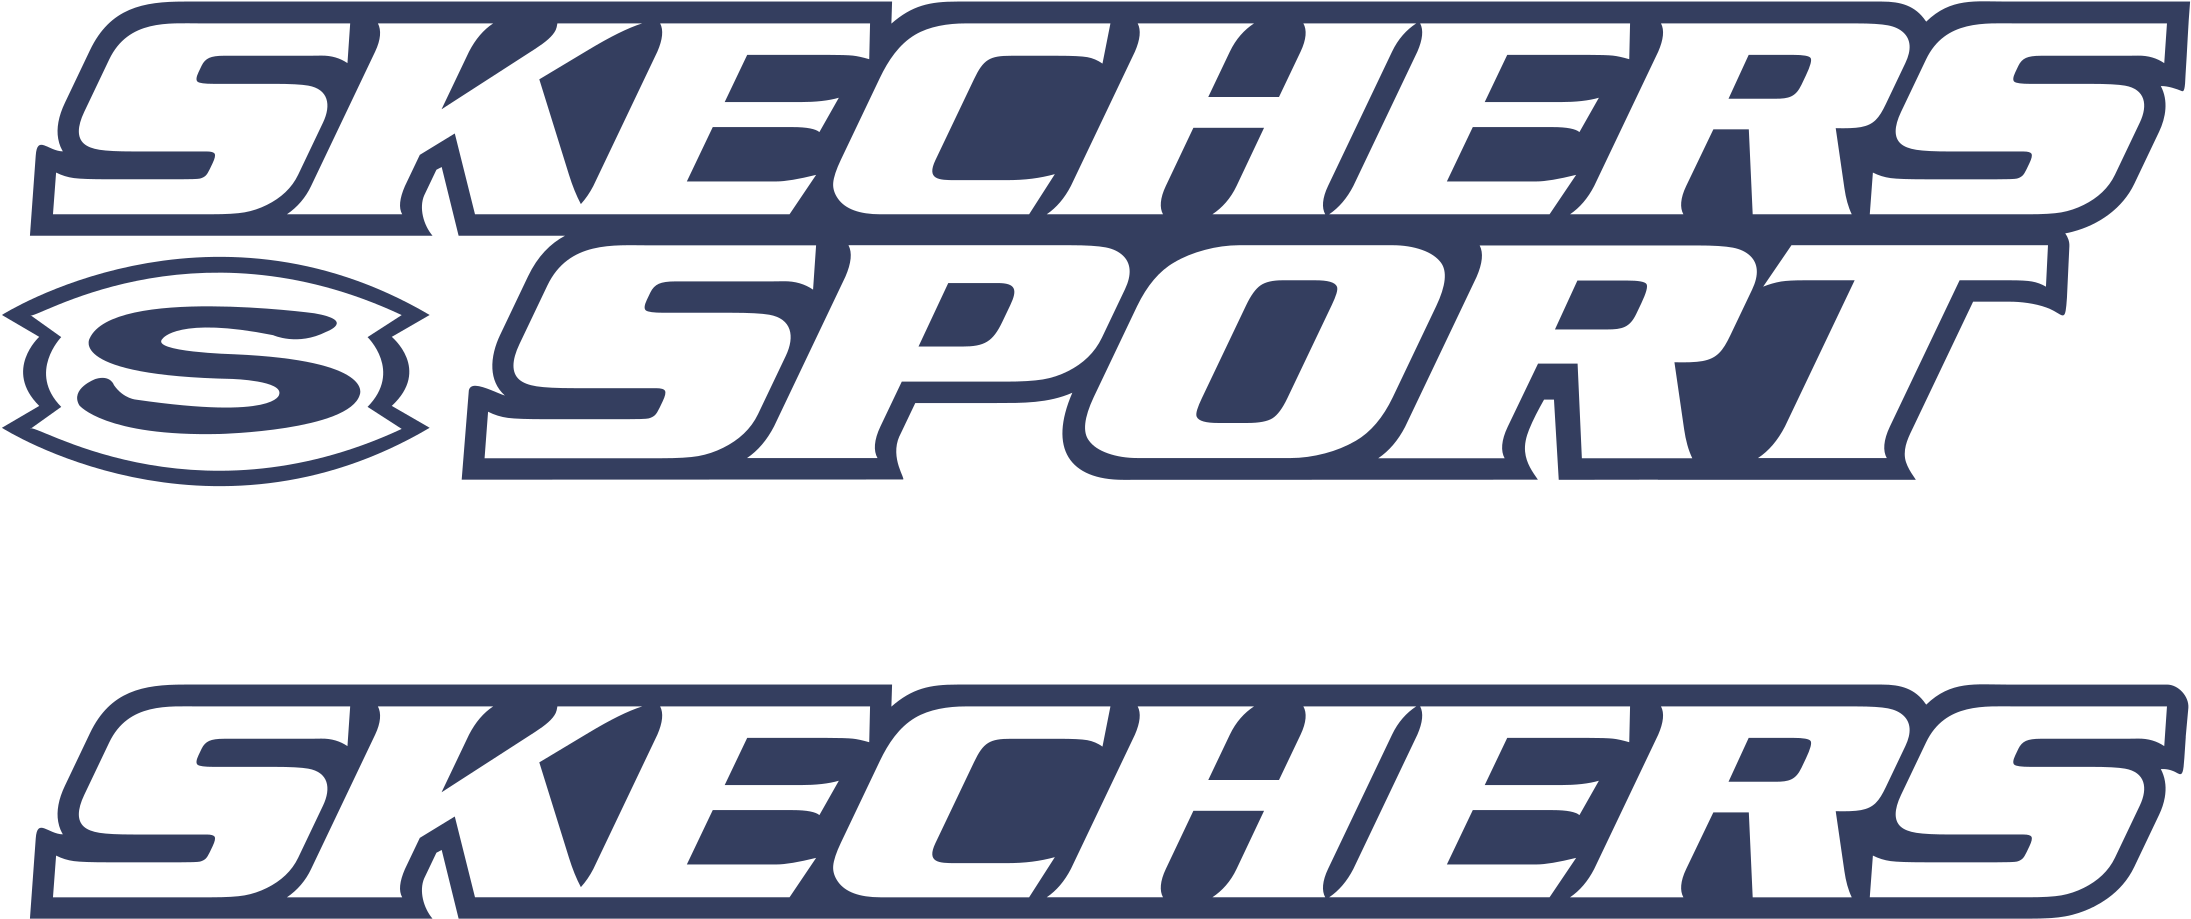 galería civilización perfil Download Skechers Logo Png Transparent - #creme And White Lacey Skechers  Size 8 PNG Image with No Background - PNGkey.com